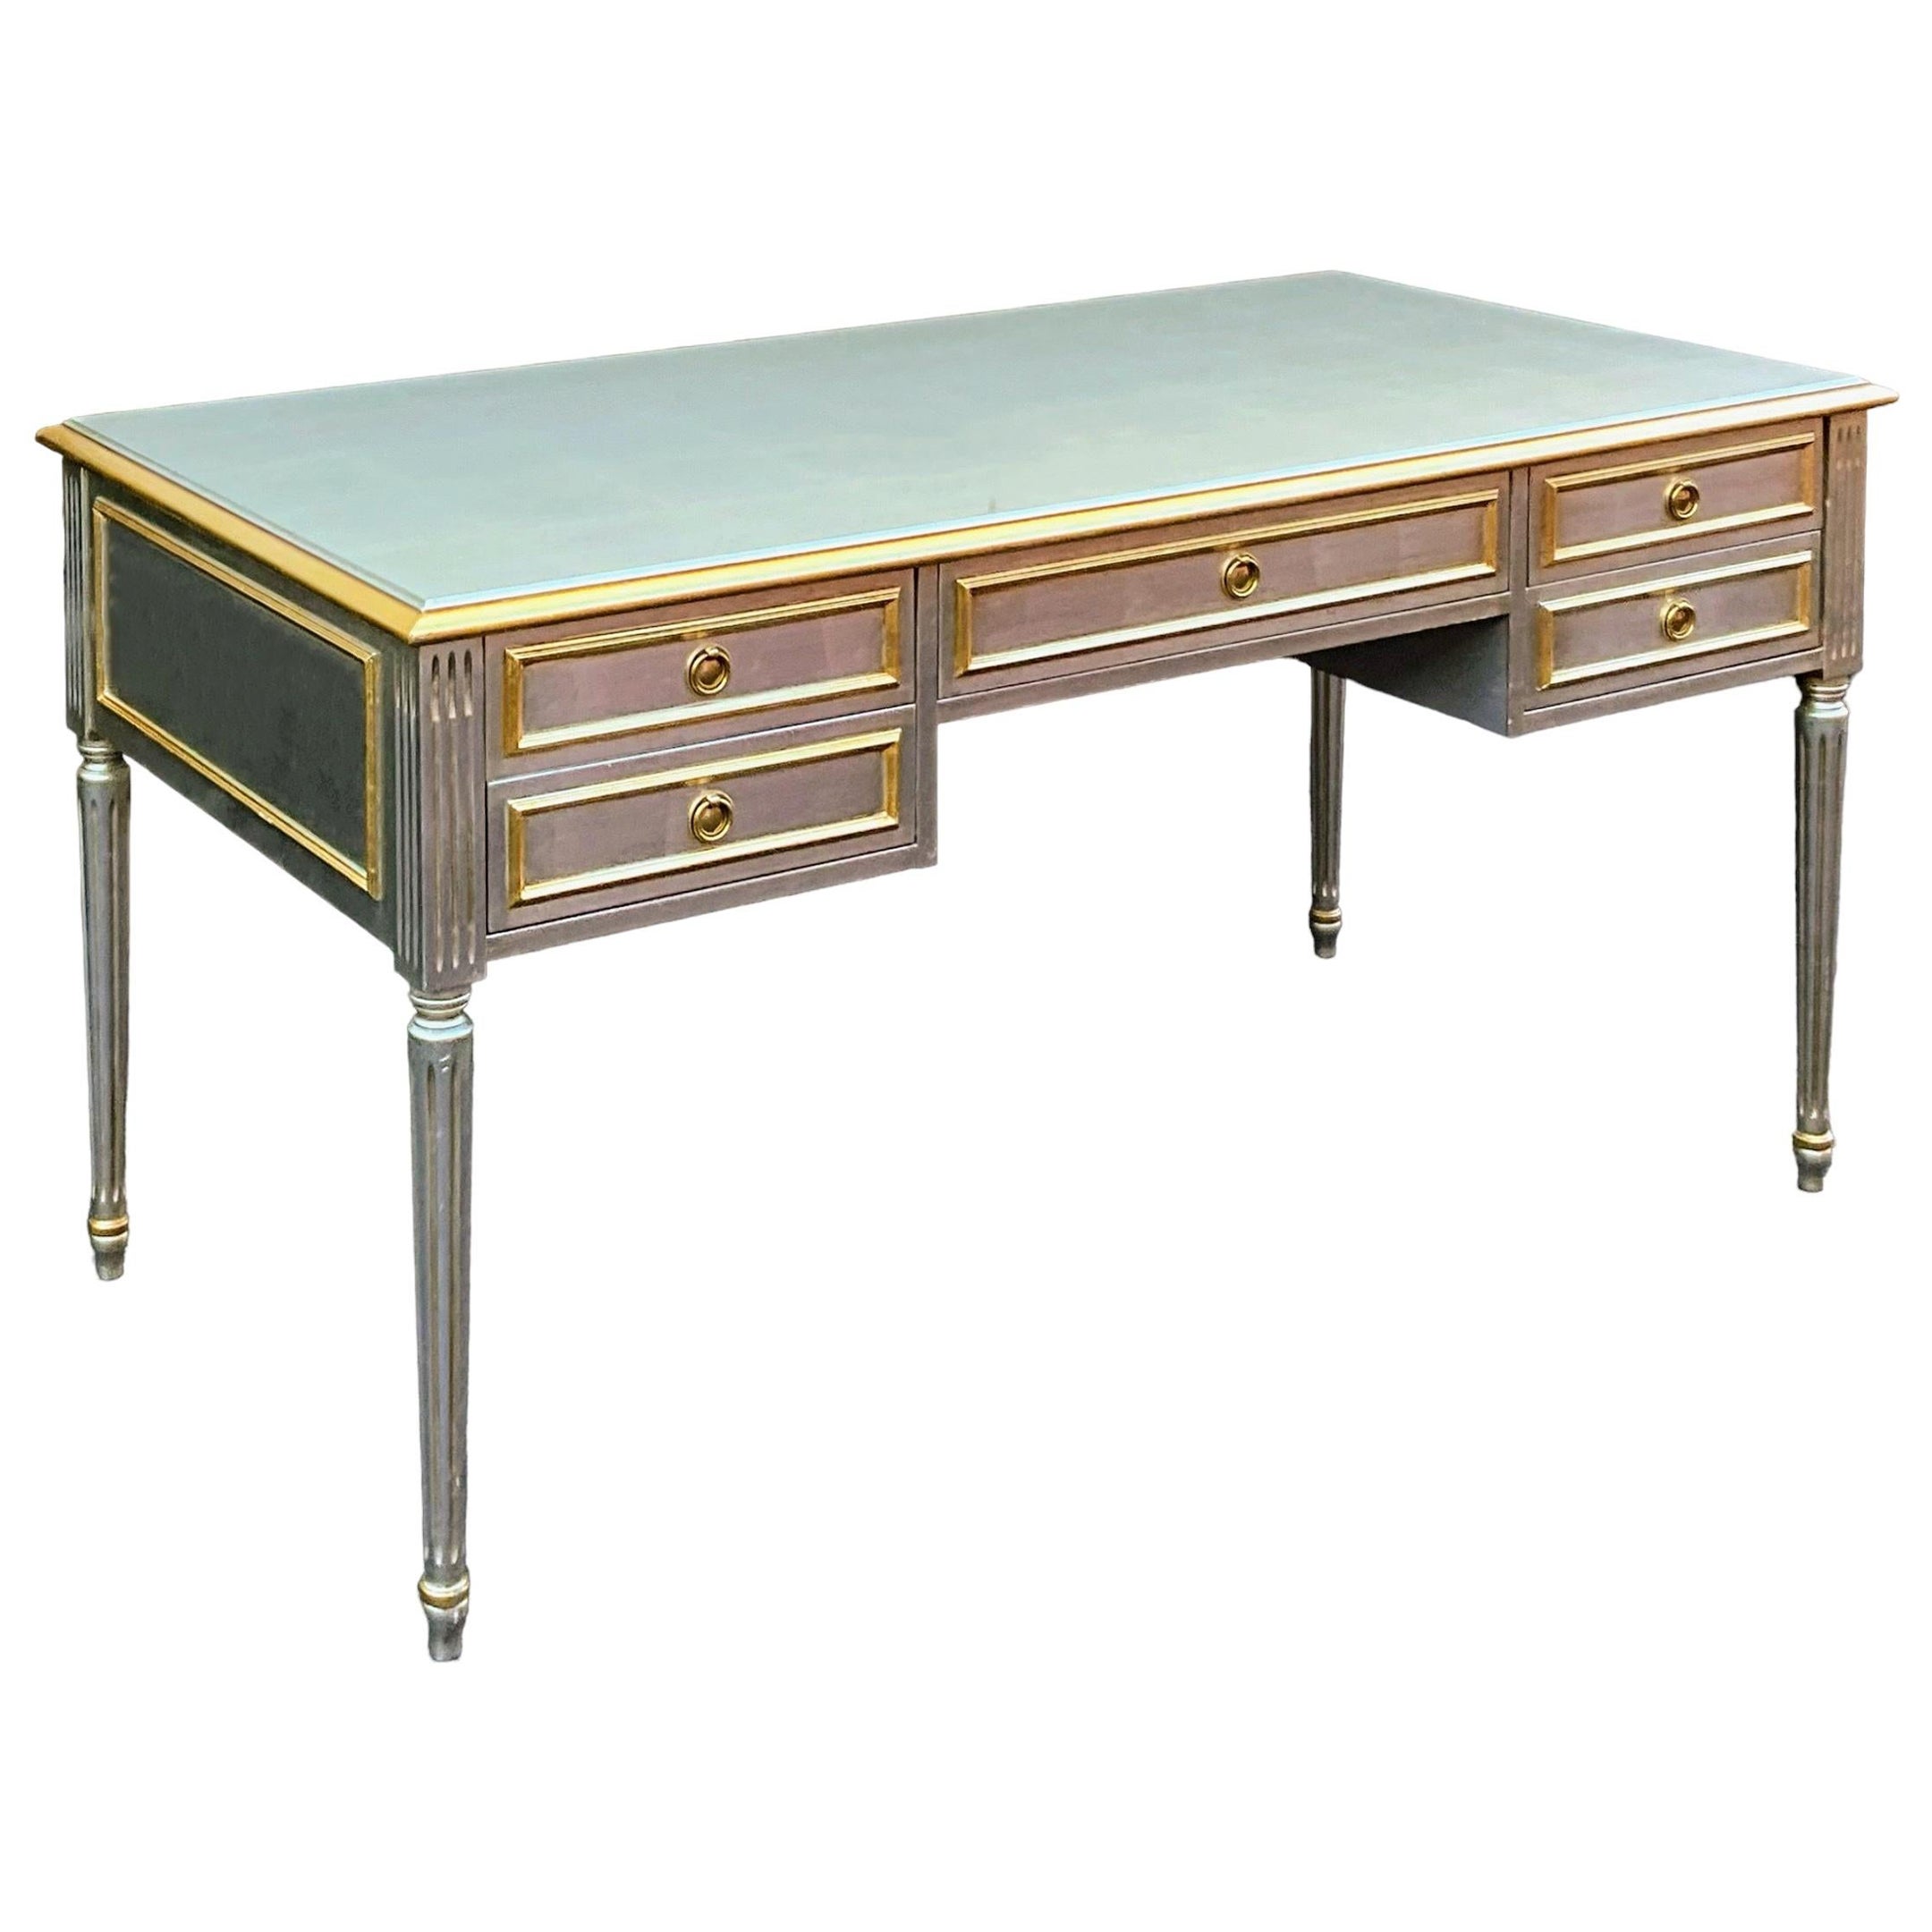 Late 20th-C. French Maison Jansen Style Silver & Gold Leaf Writing Desk For Sale